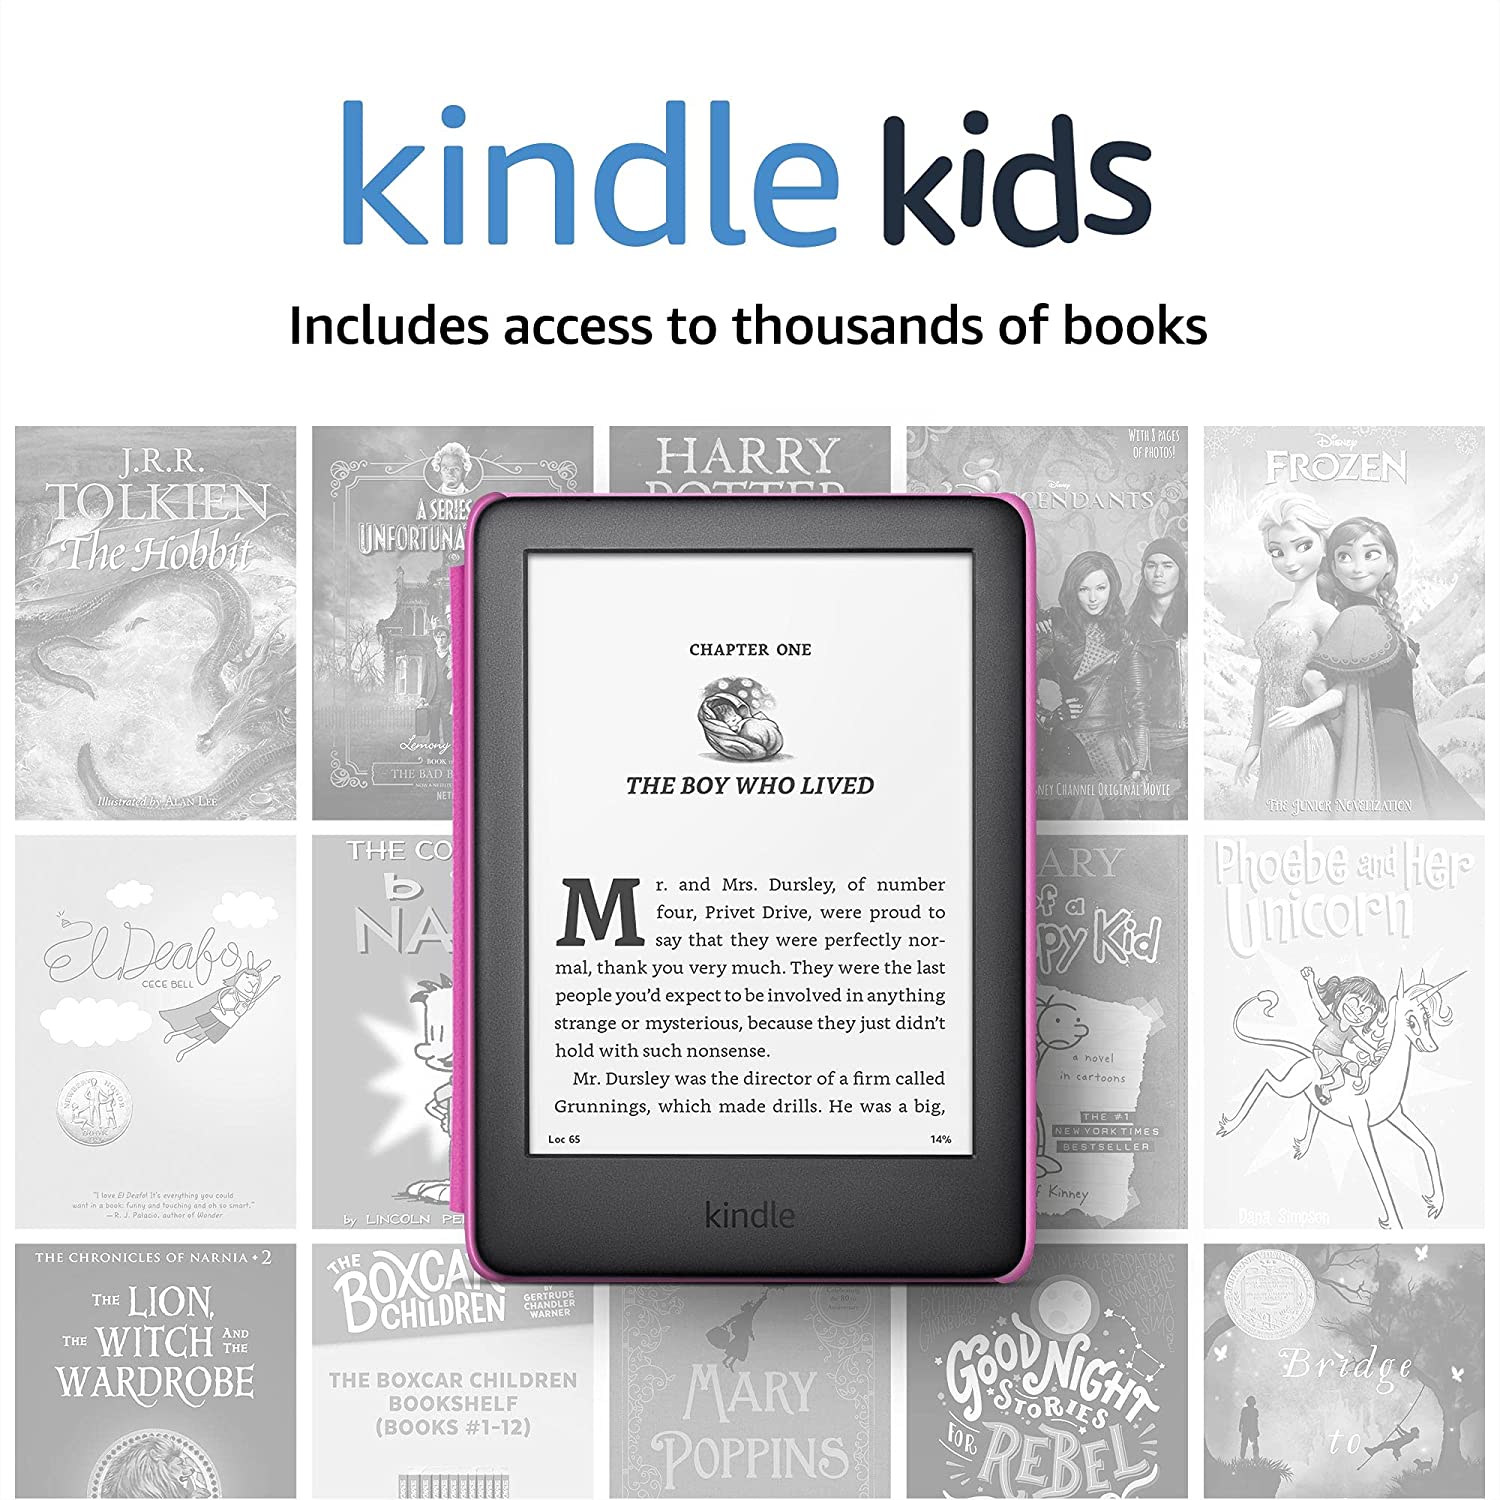 Kindle Kids is a line of Amazon Kindle e-readers designed specifically for children. These devices come with features such as parental controls, a kid-friendly interface, and access to a wide range of age-appropriate books. They are also durable and lightweight, making them ideal for young readers.